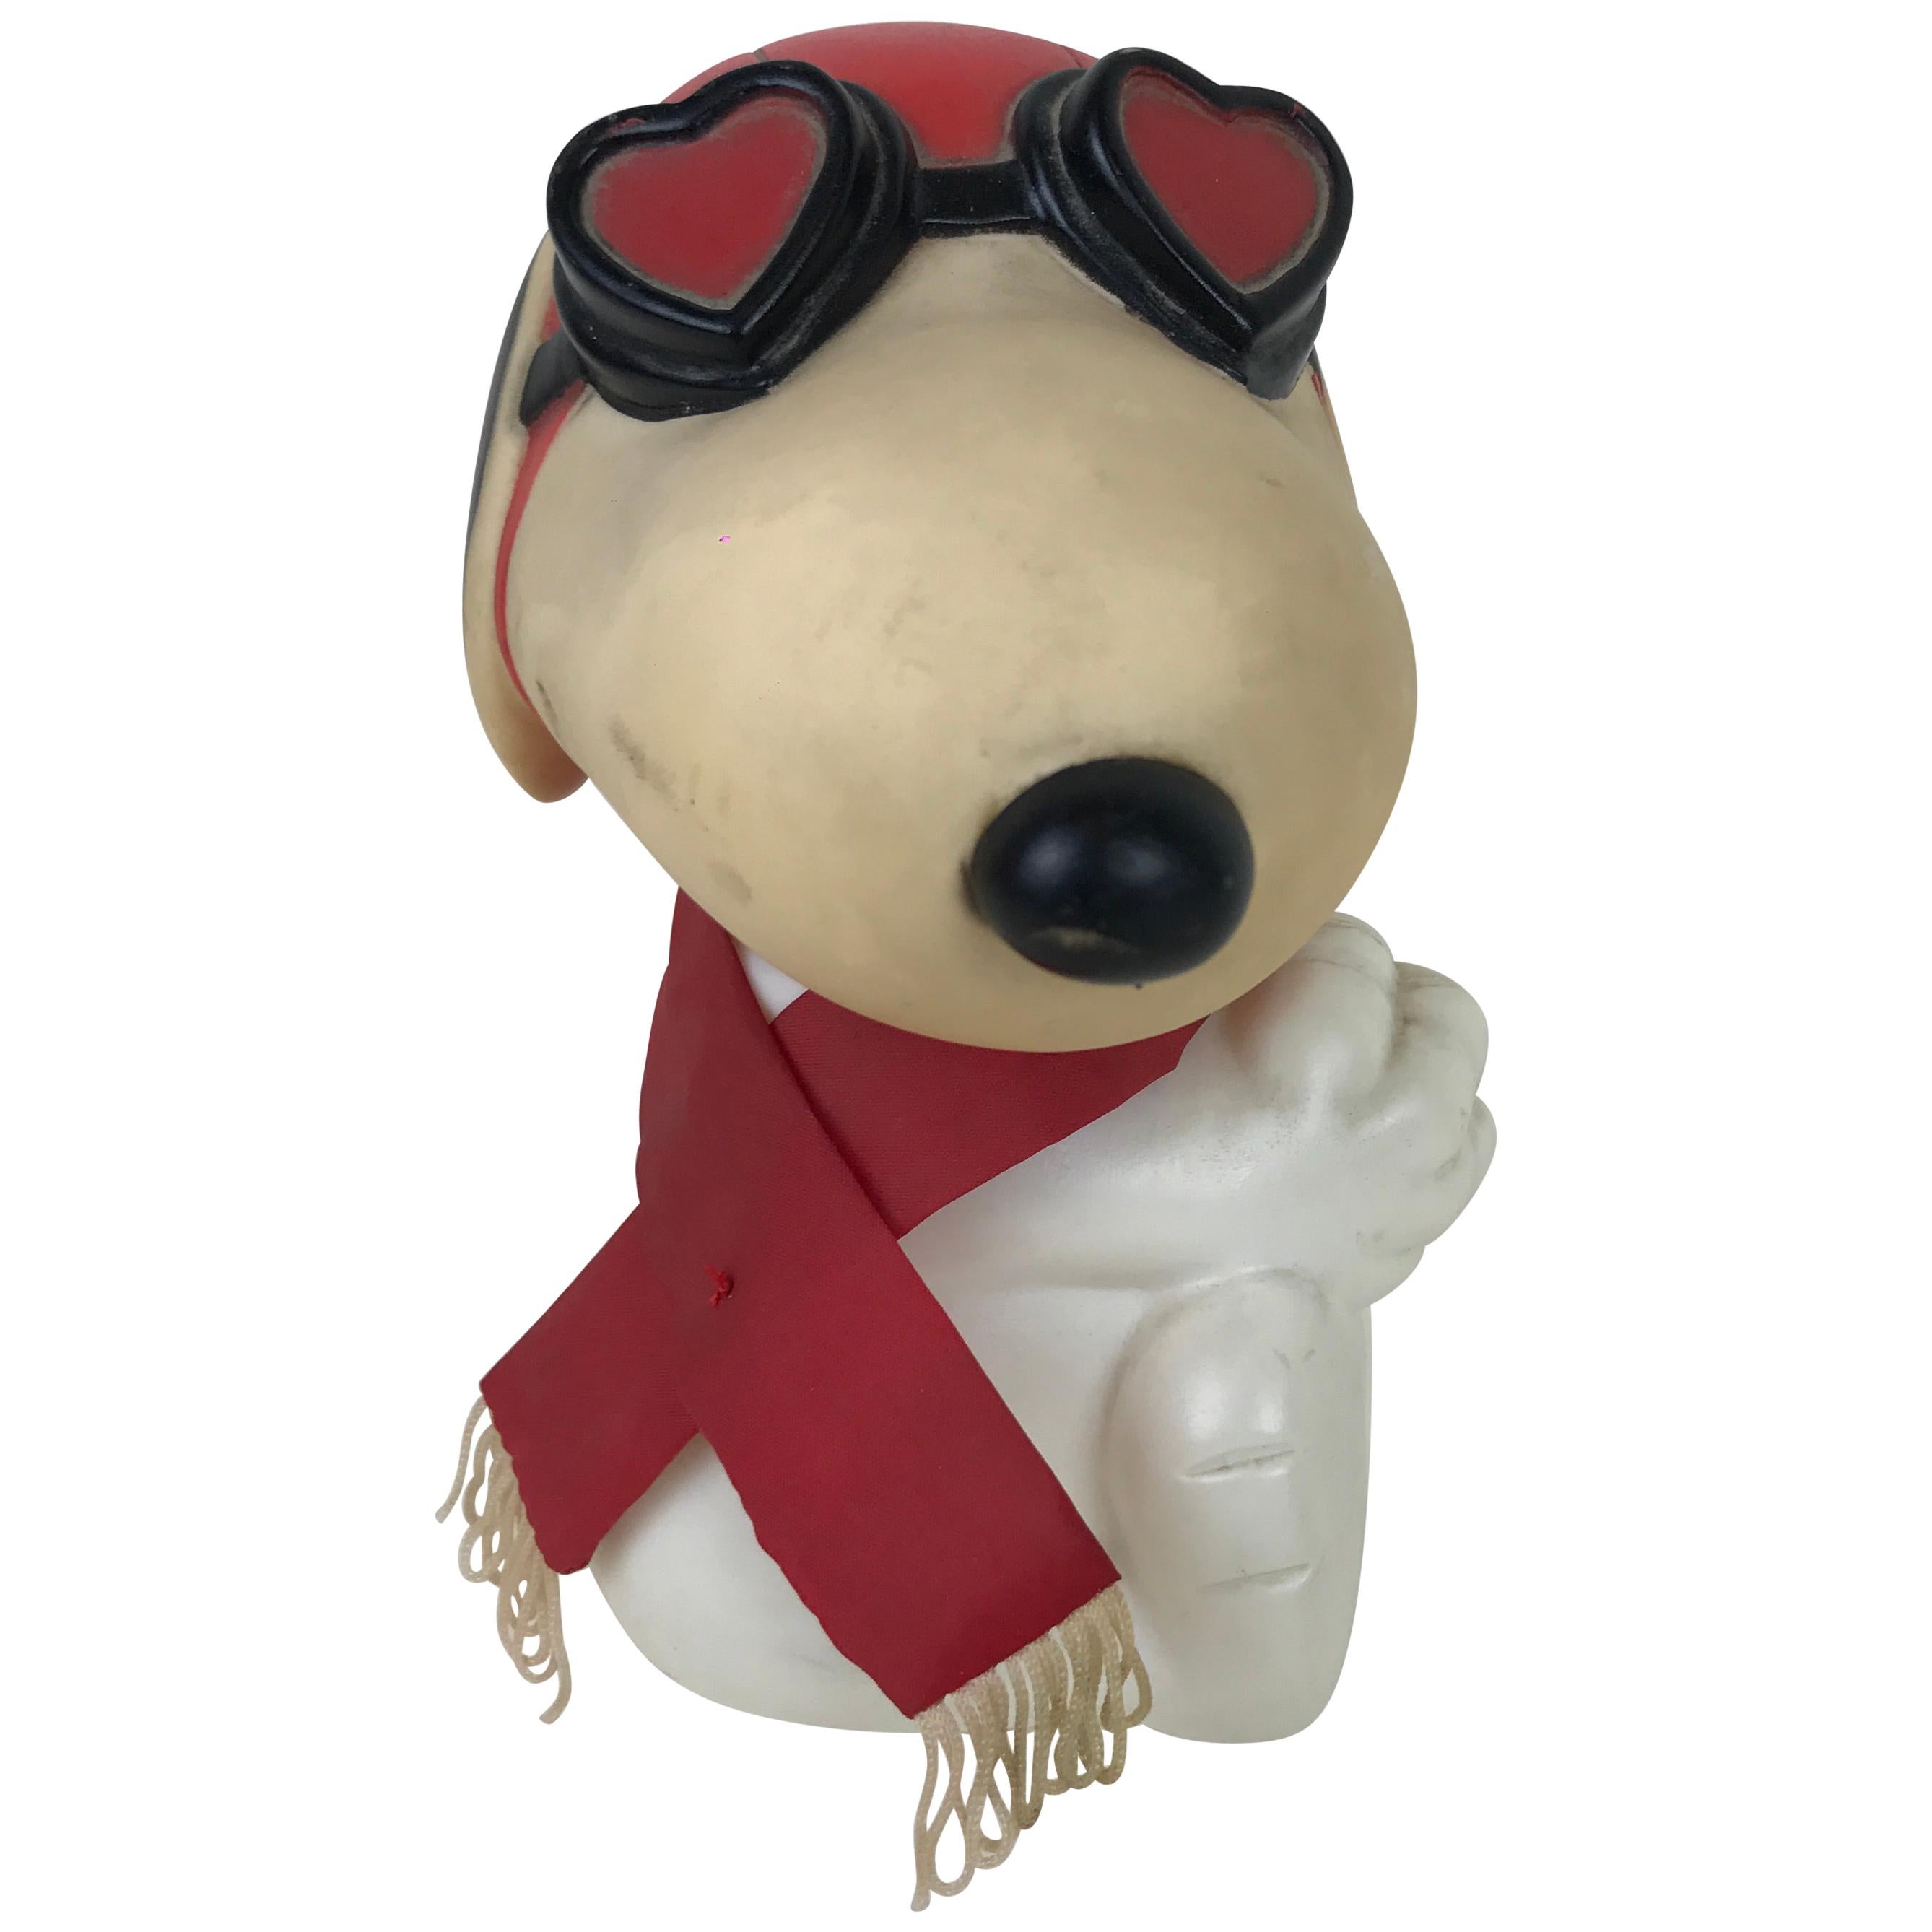 1960s Vintage Plastic Model of Snoopy Wearing Scarf and Heart Shaped Googles